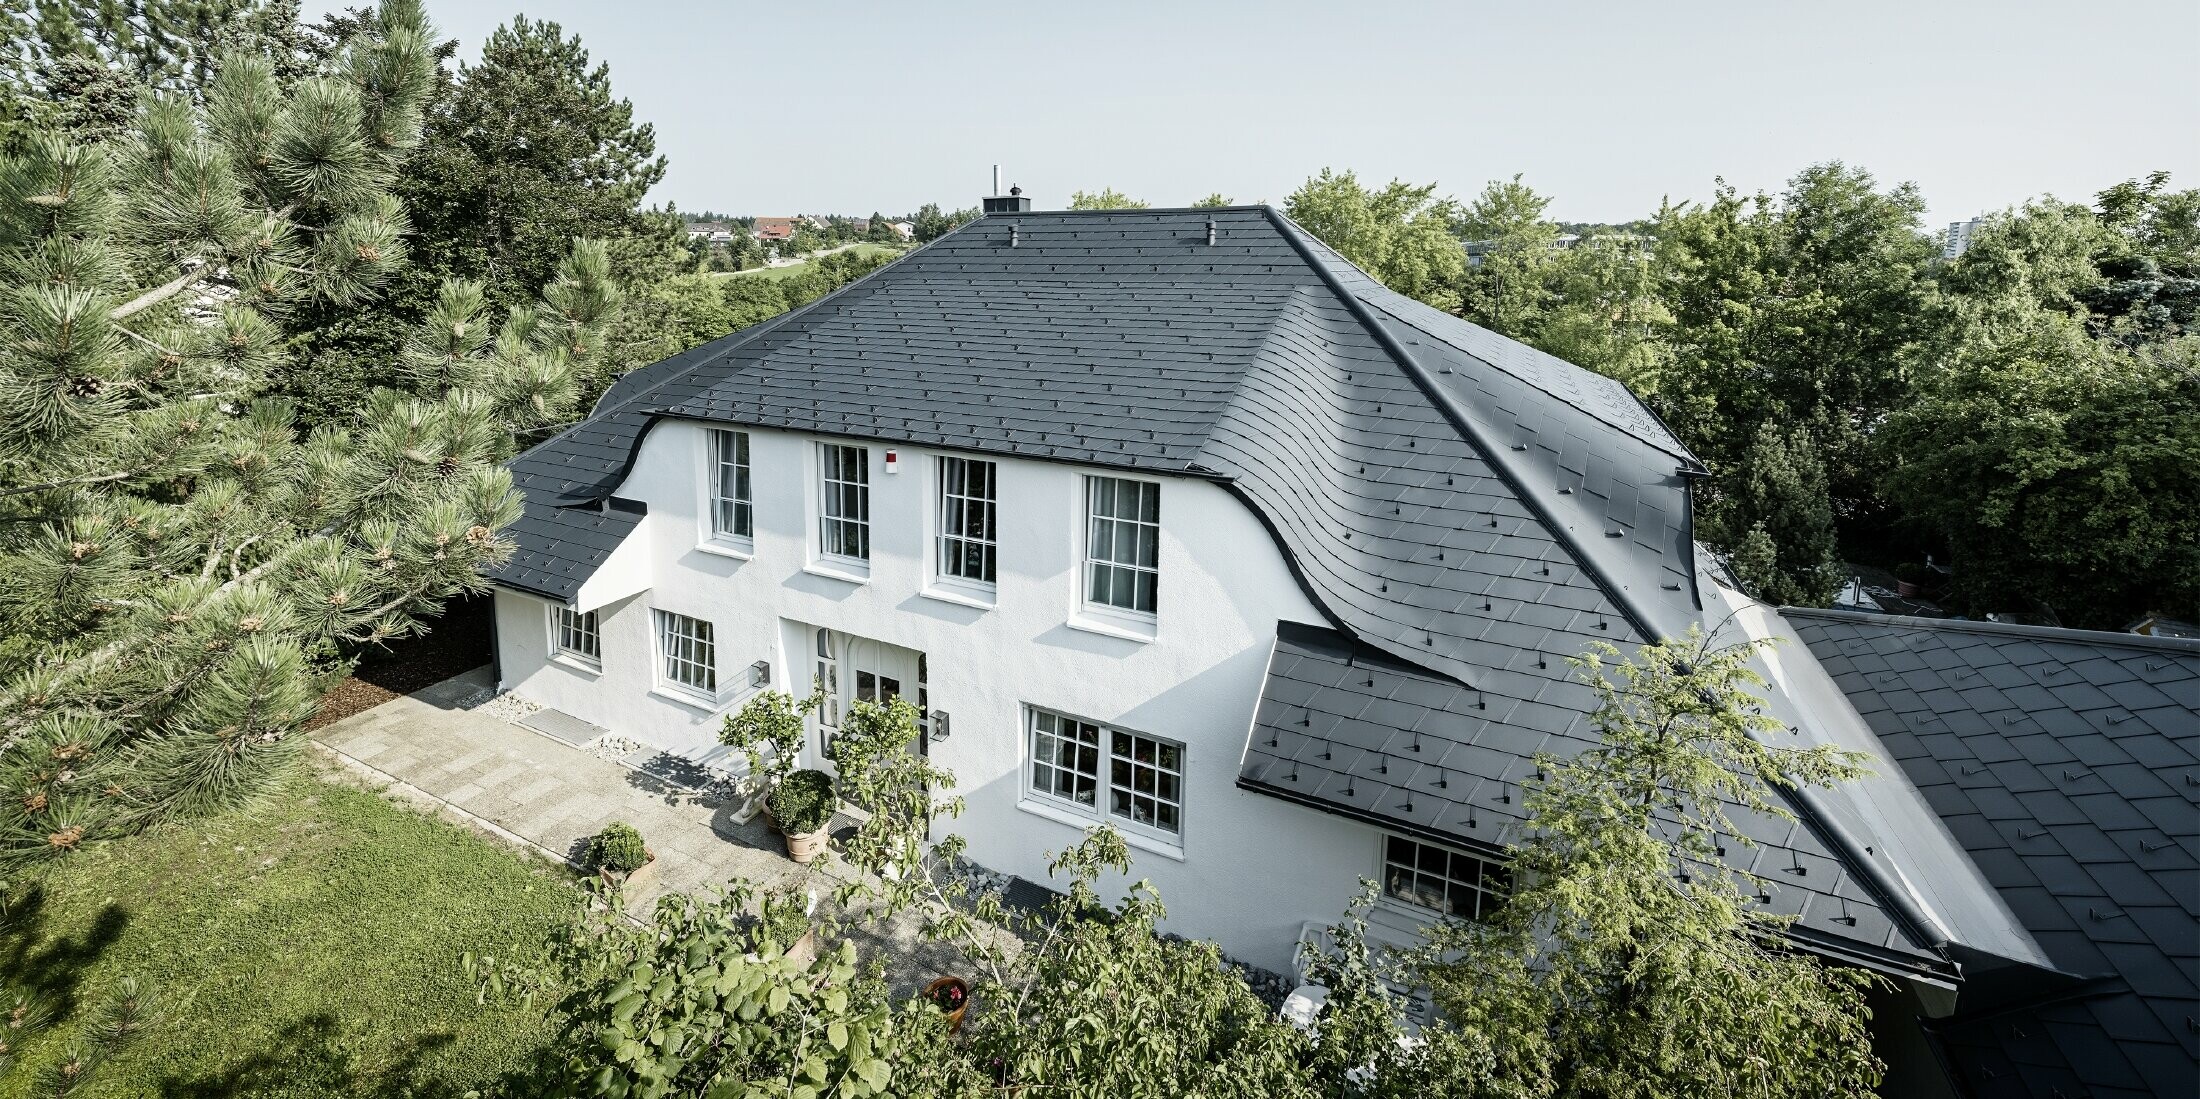 Hipped roof with many curved dormers, covered with DS.19 aluminium roof shingles in anthracite